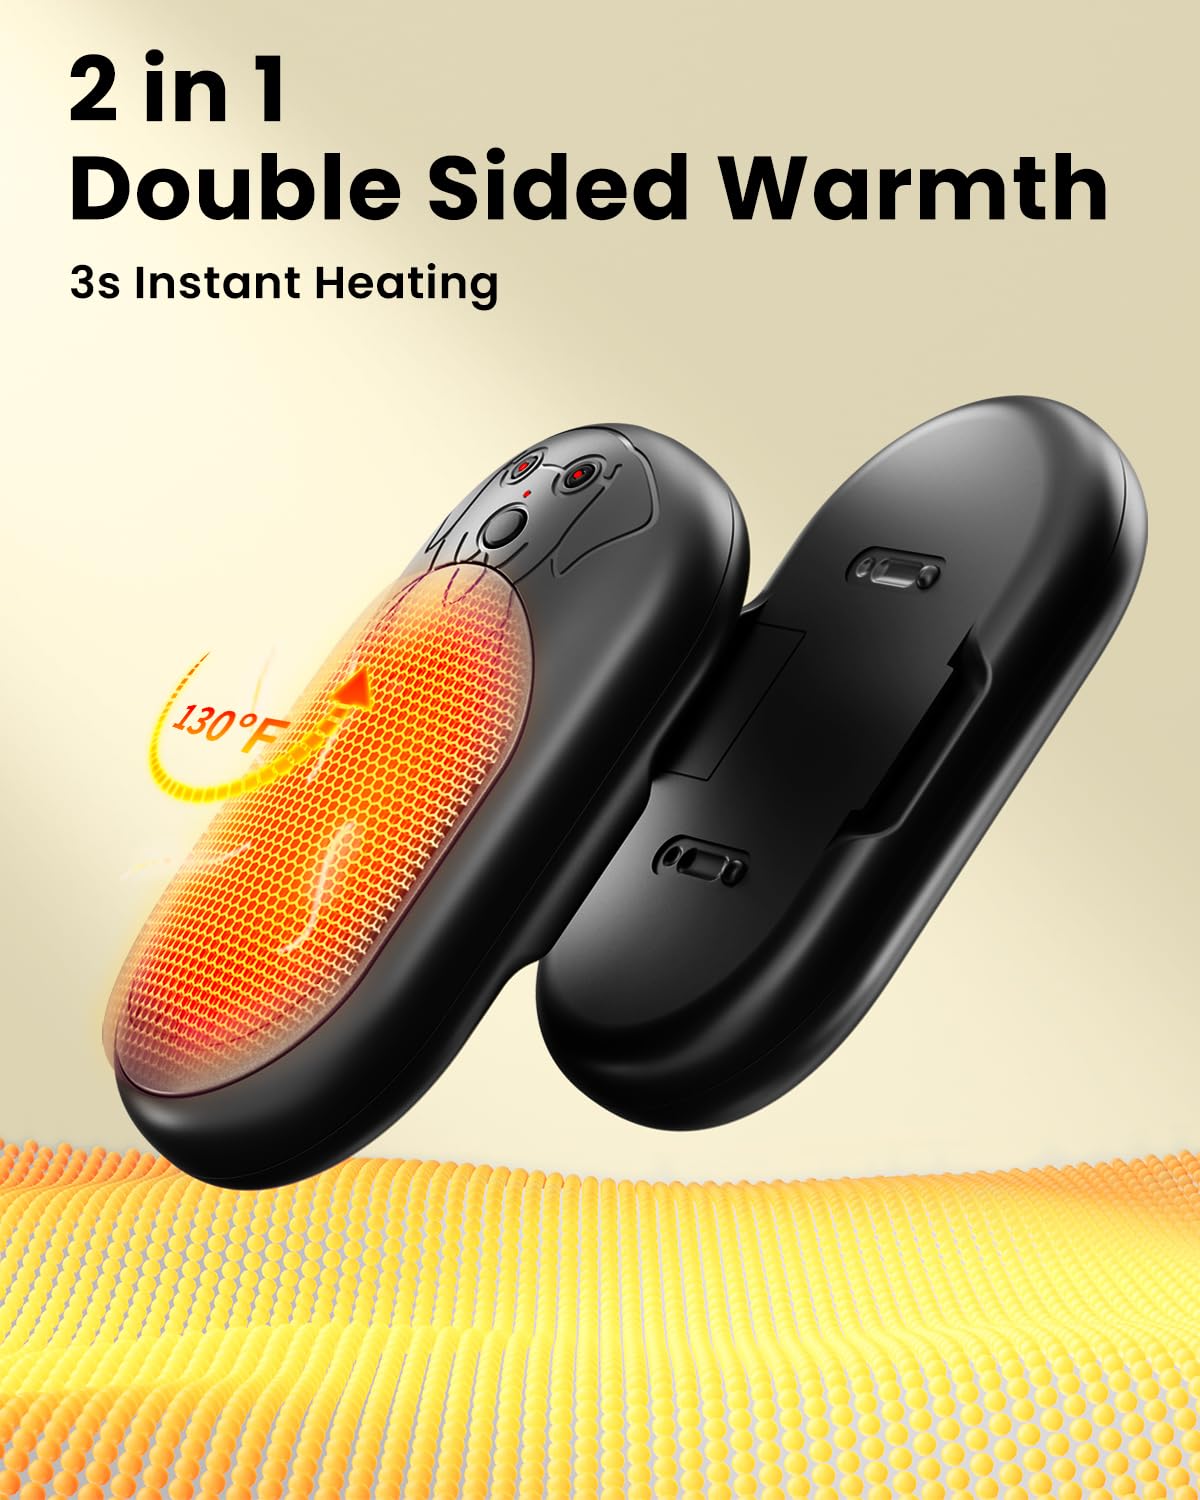 Electric Hand Warmers Rechargeable 2 Pack 3000Mah*2, Portable Heater Battery Powered, Men Women Gifts for Chrismas, Outdoor Camping, Hunting